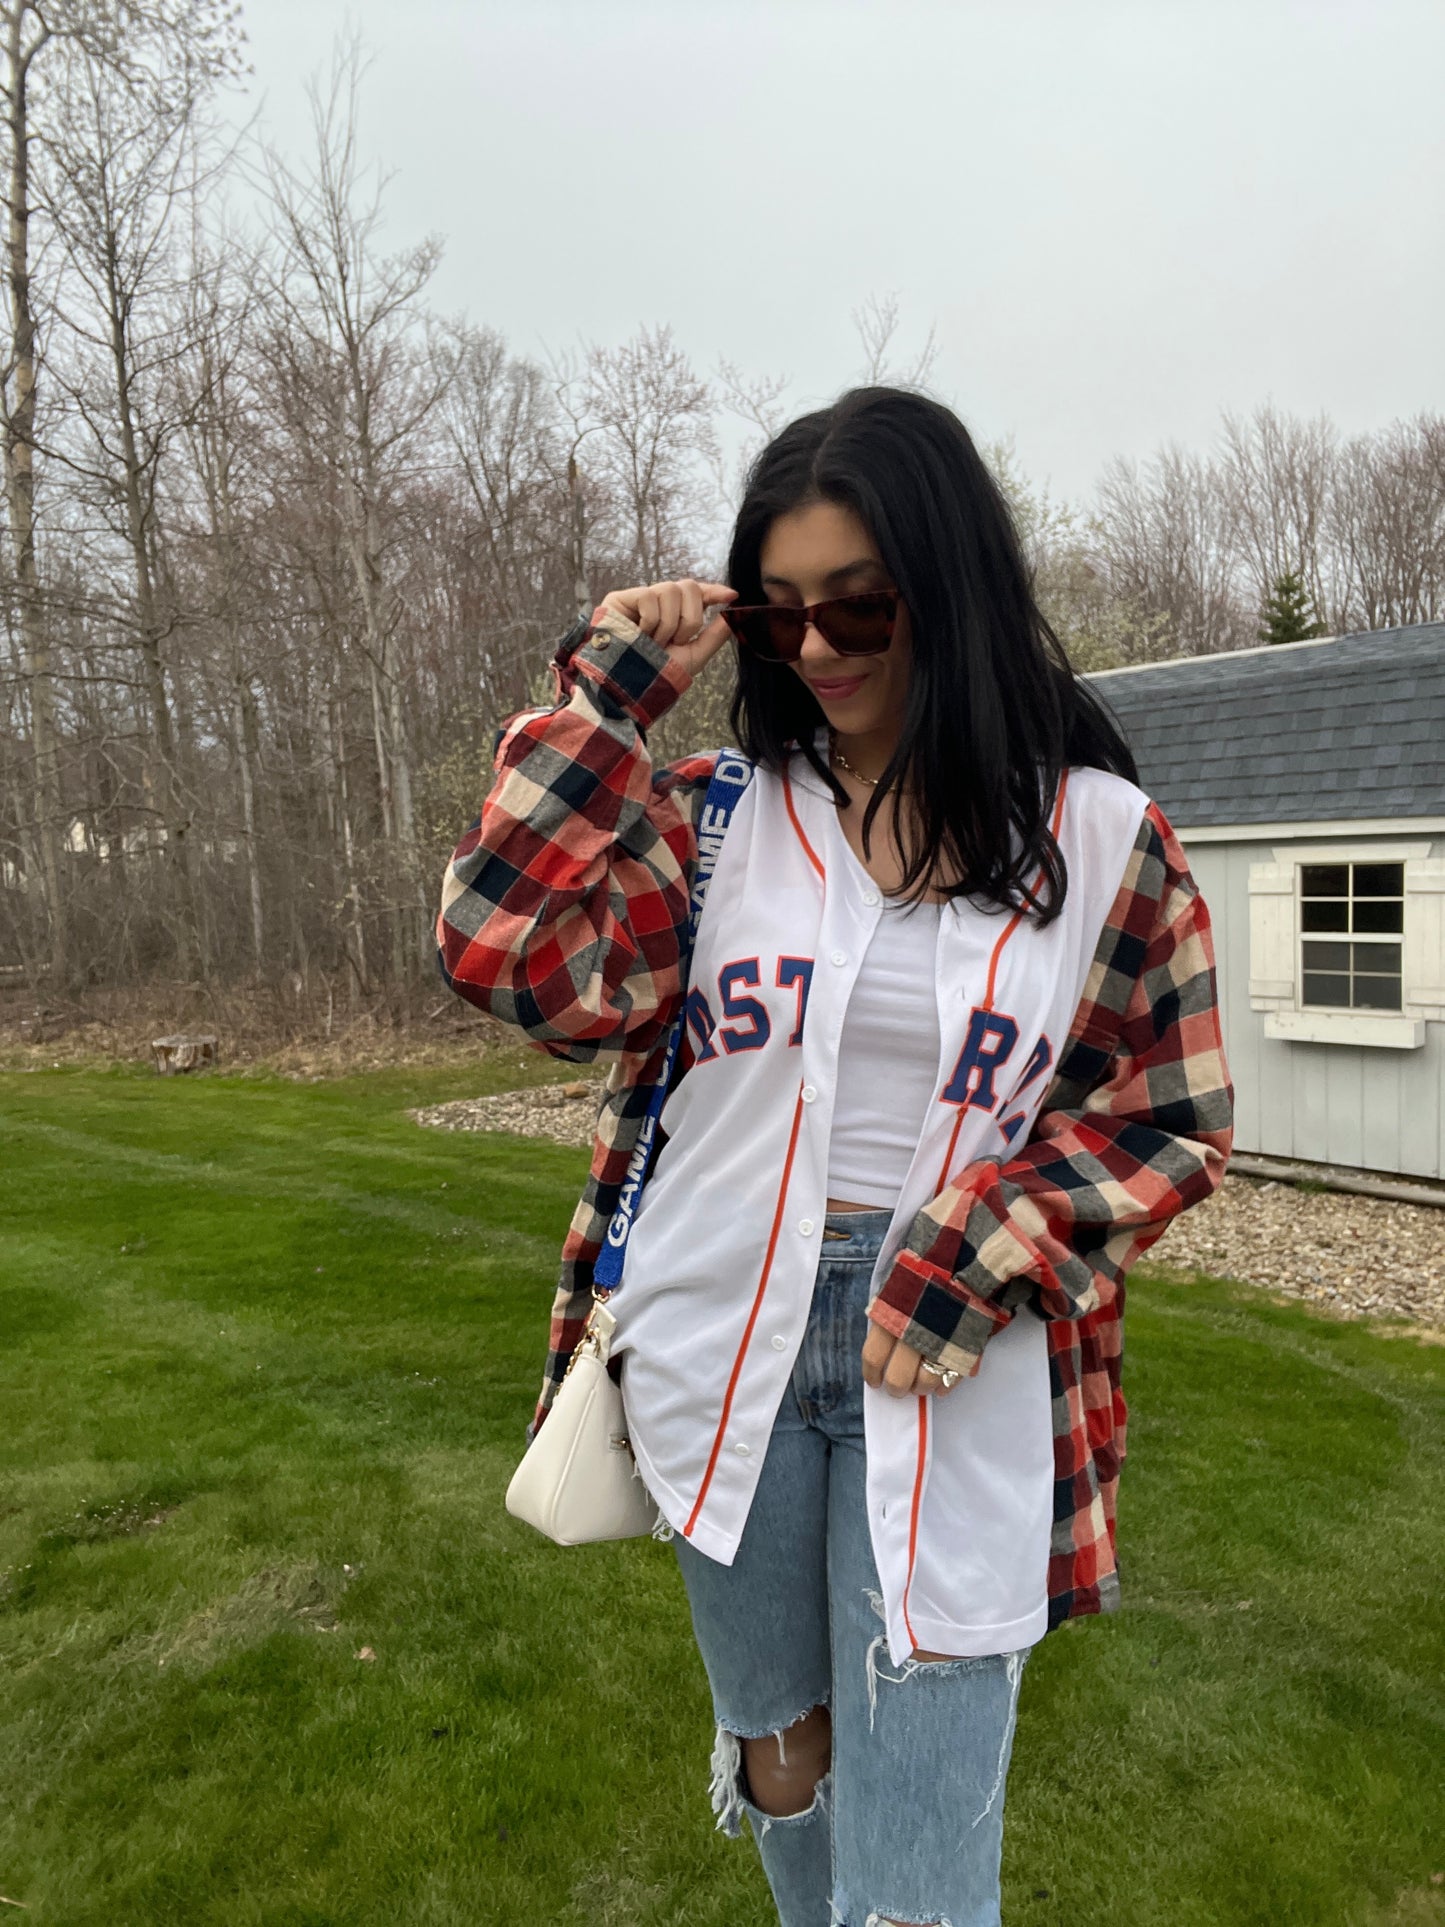 ASTROS JERSEY X FLANNEL